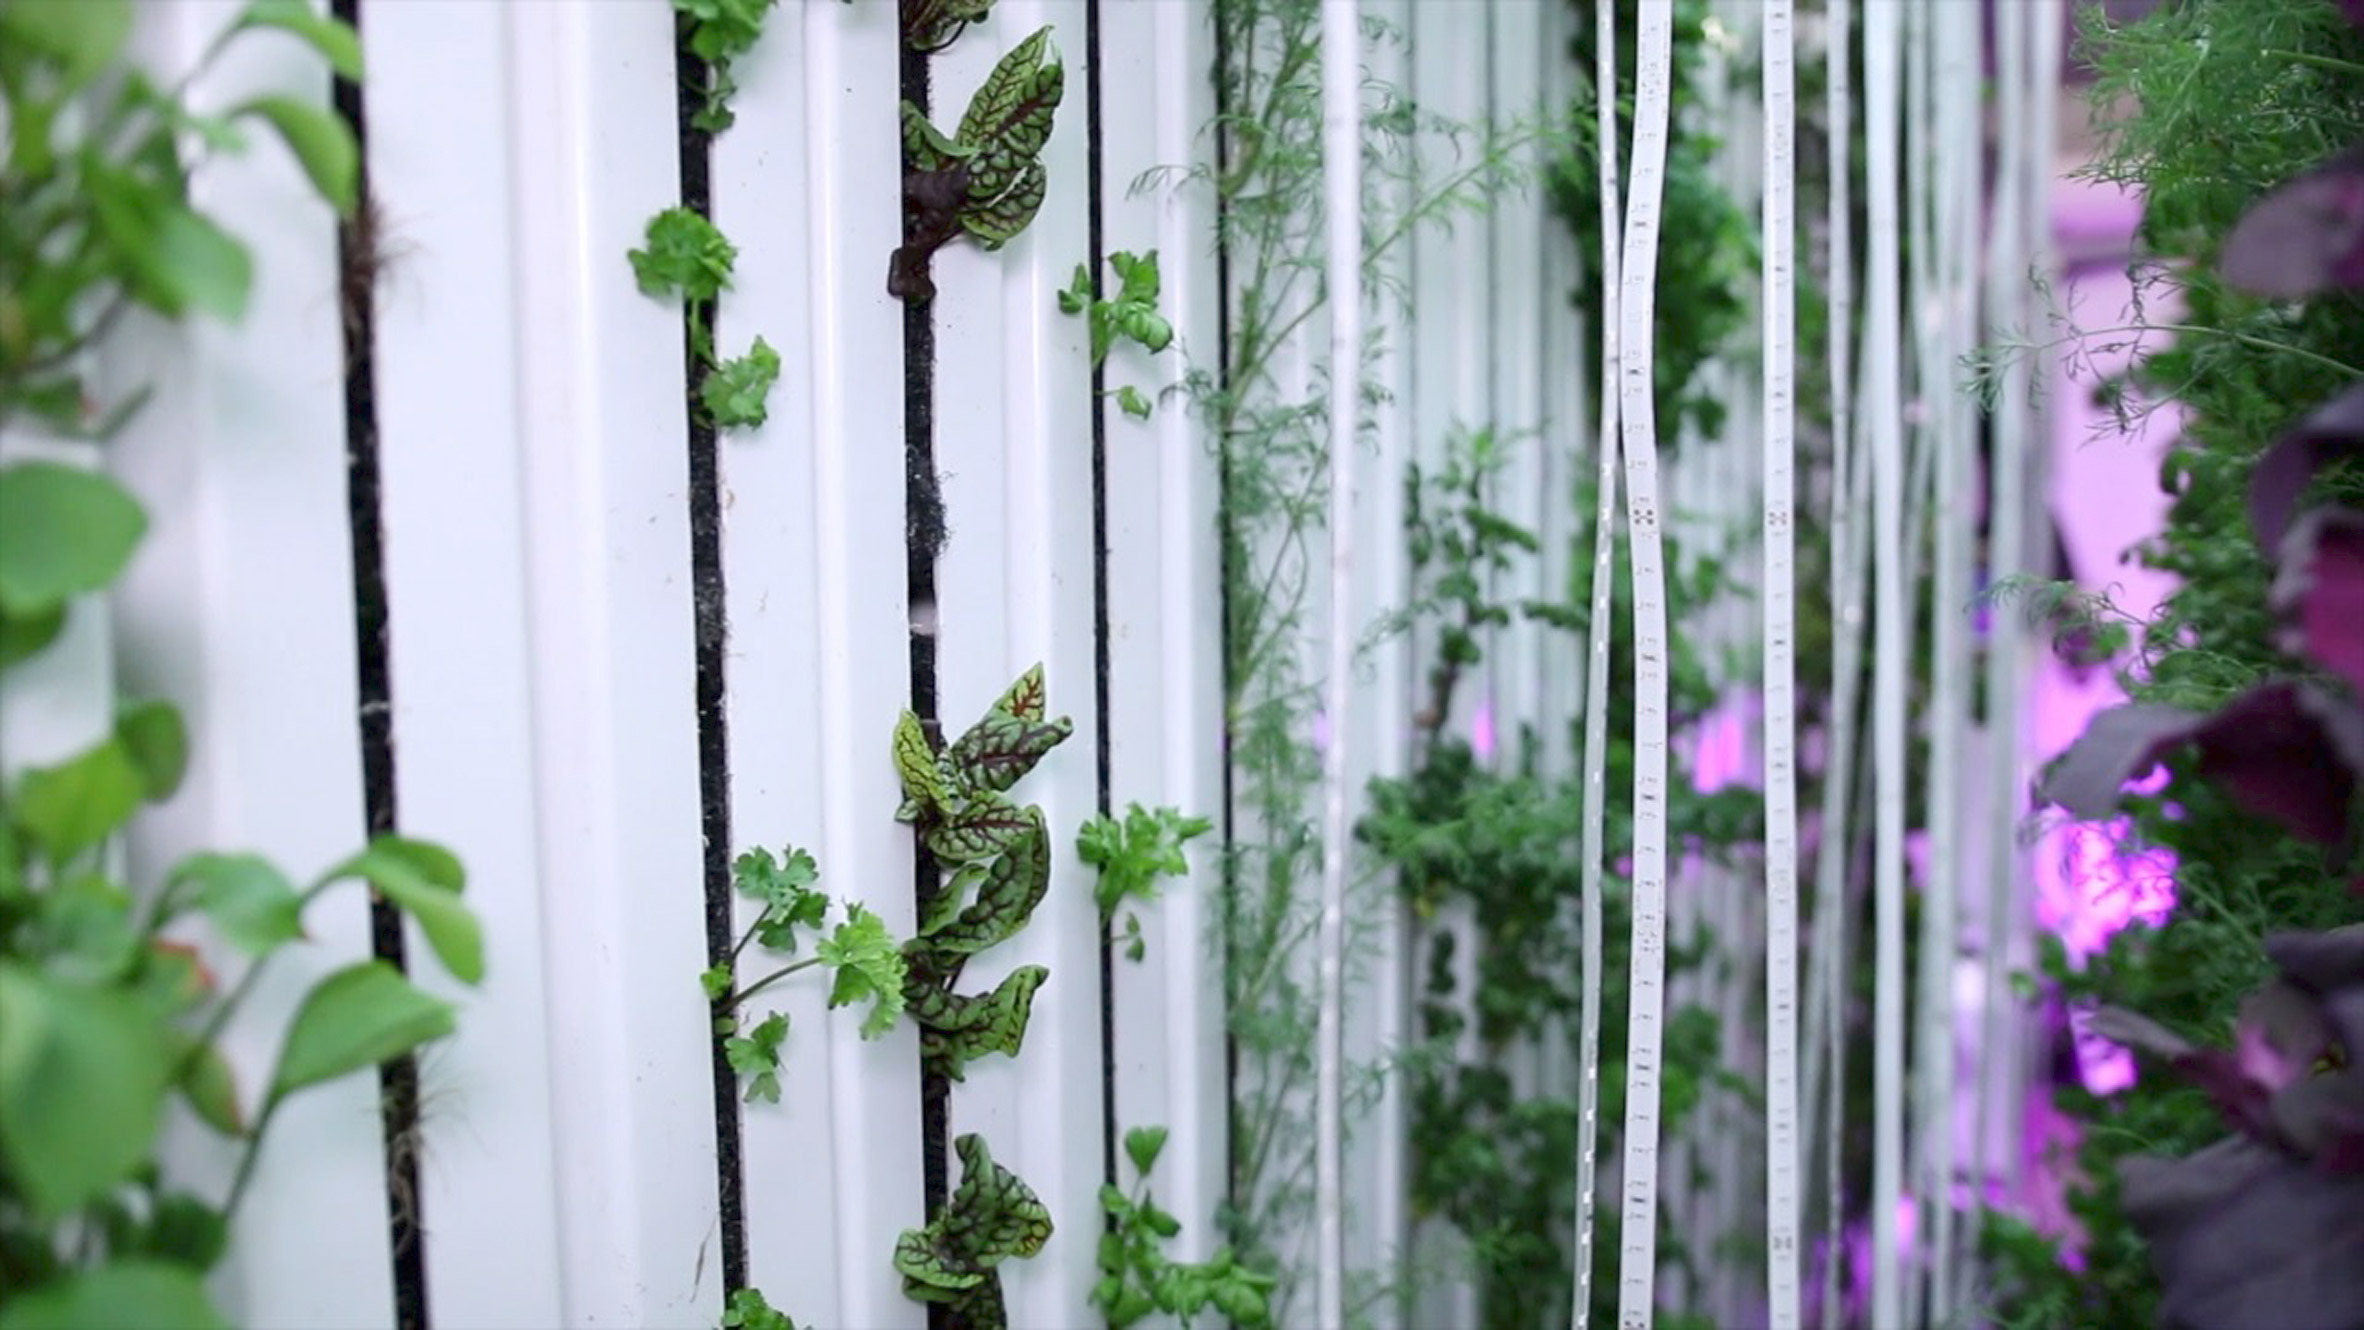 Hydroponic farm in containers